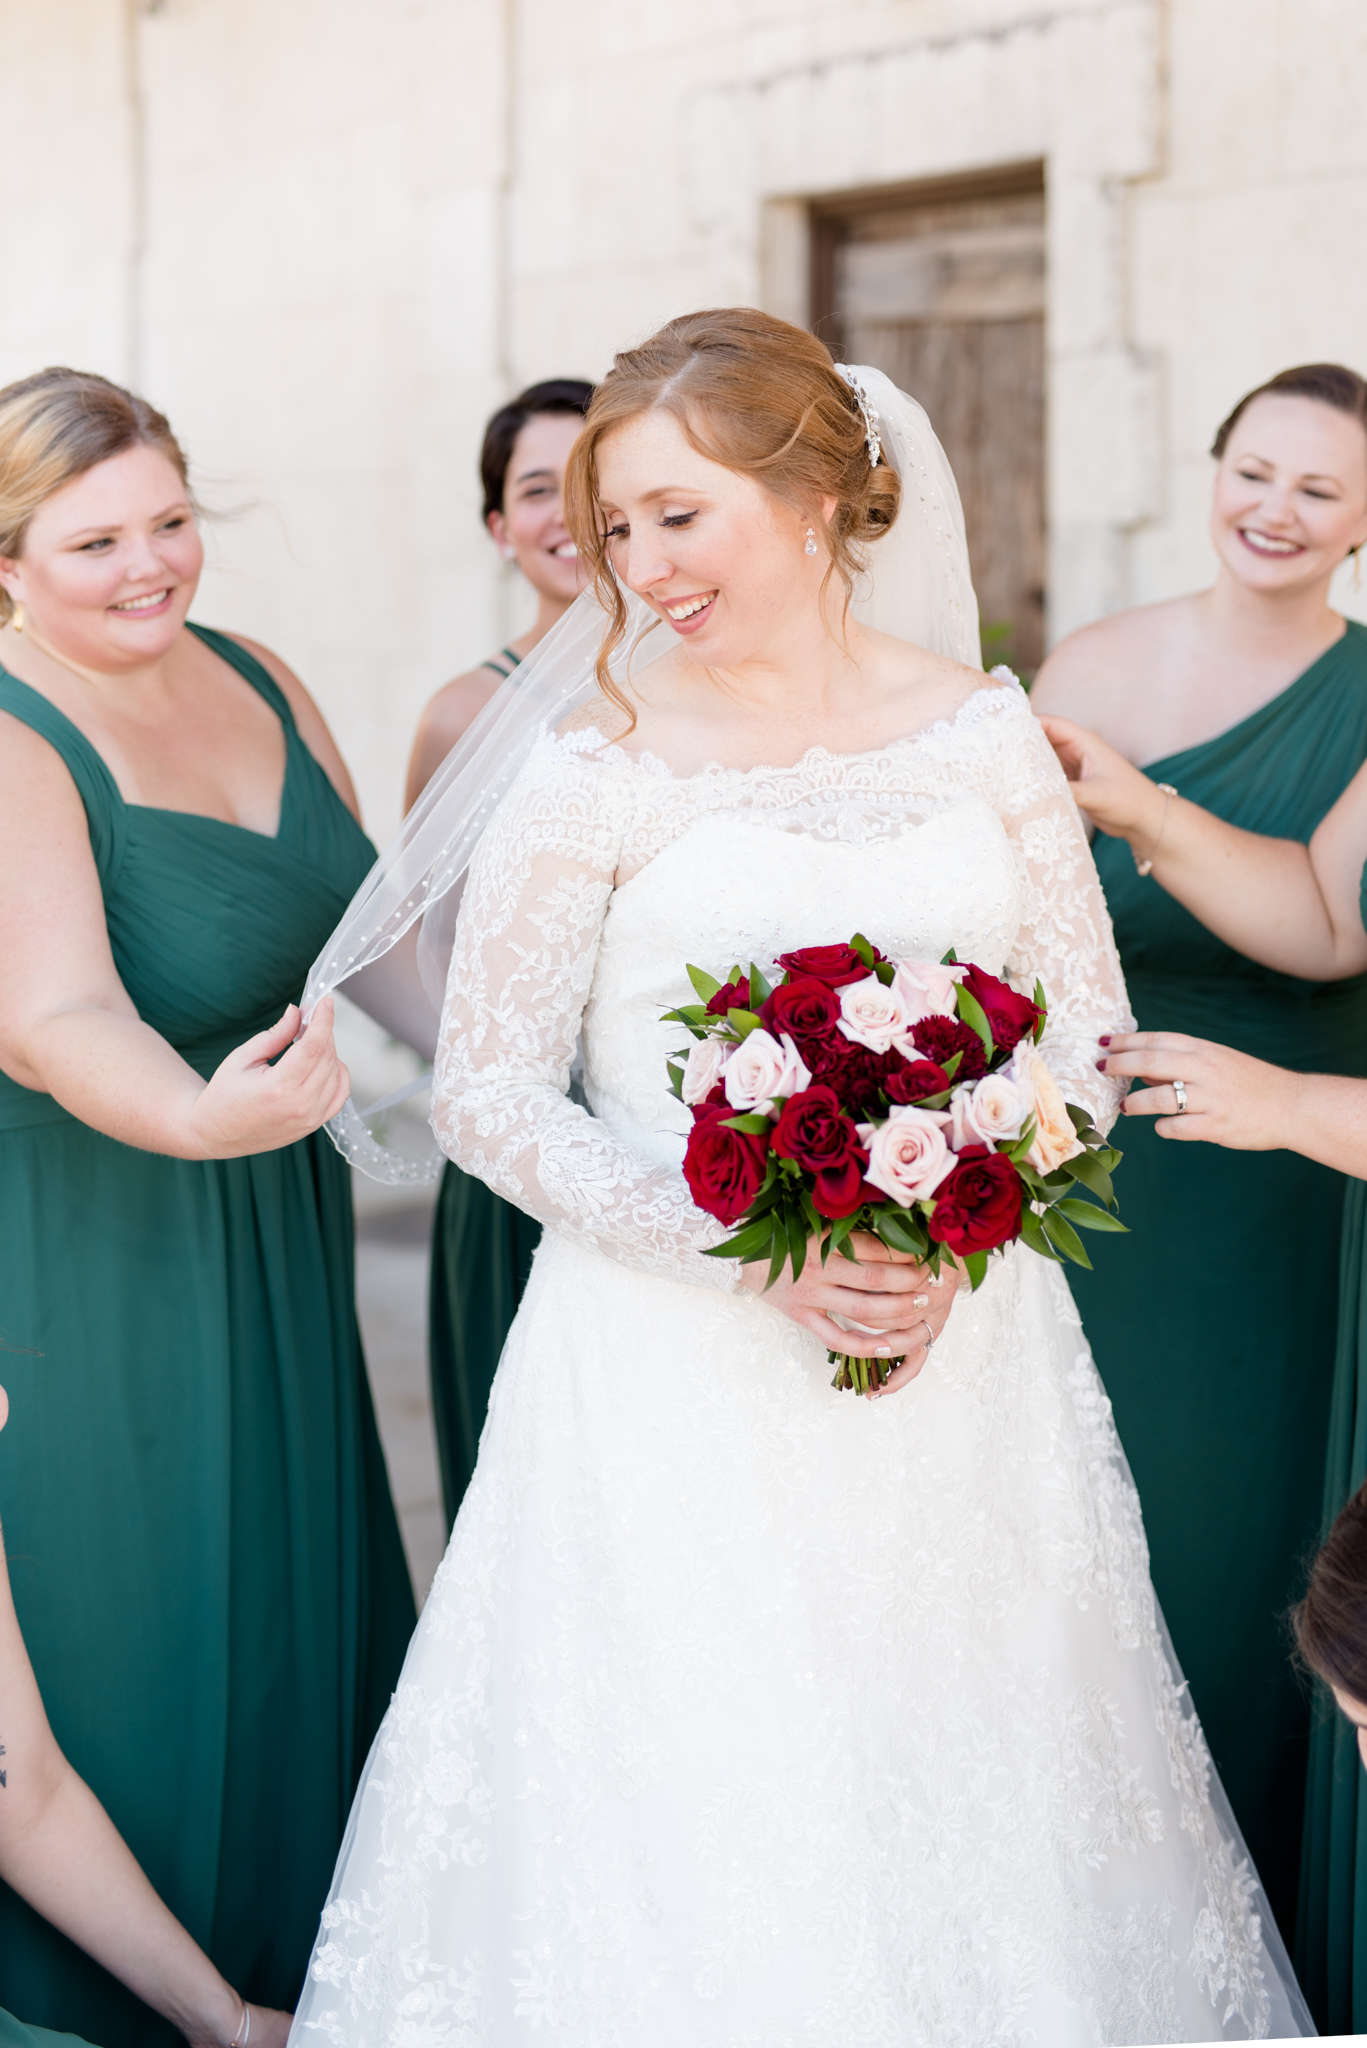 Bride gets help from bridesmaids while getting ready.